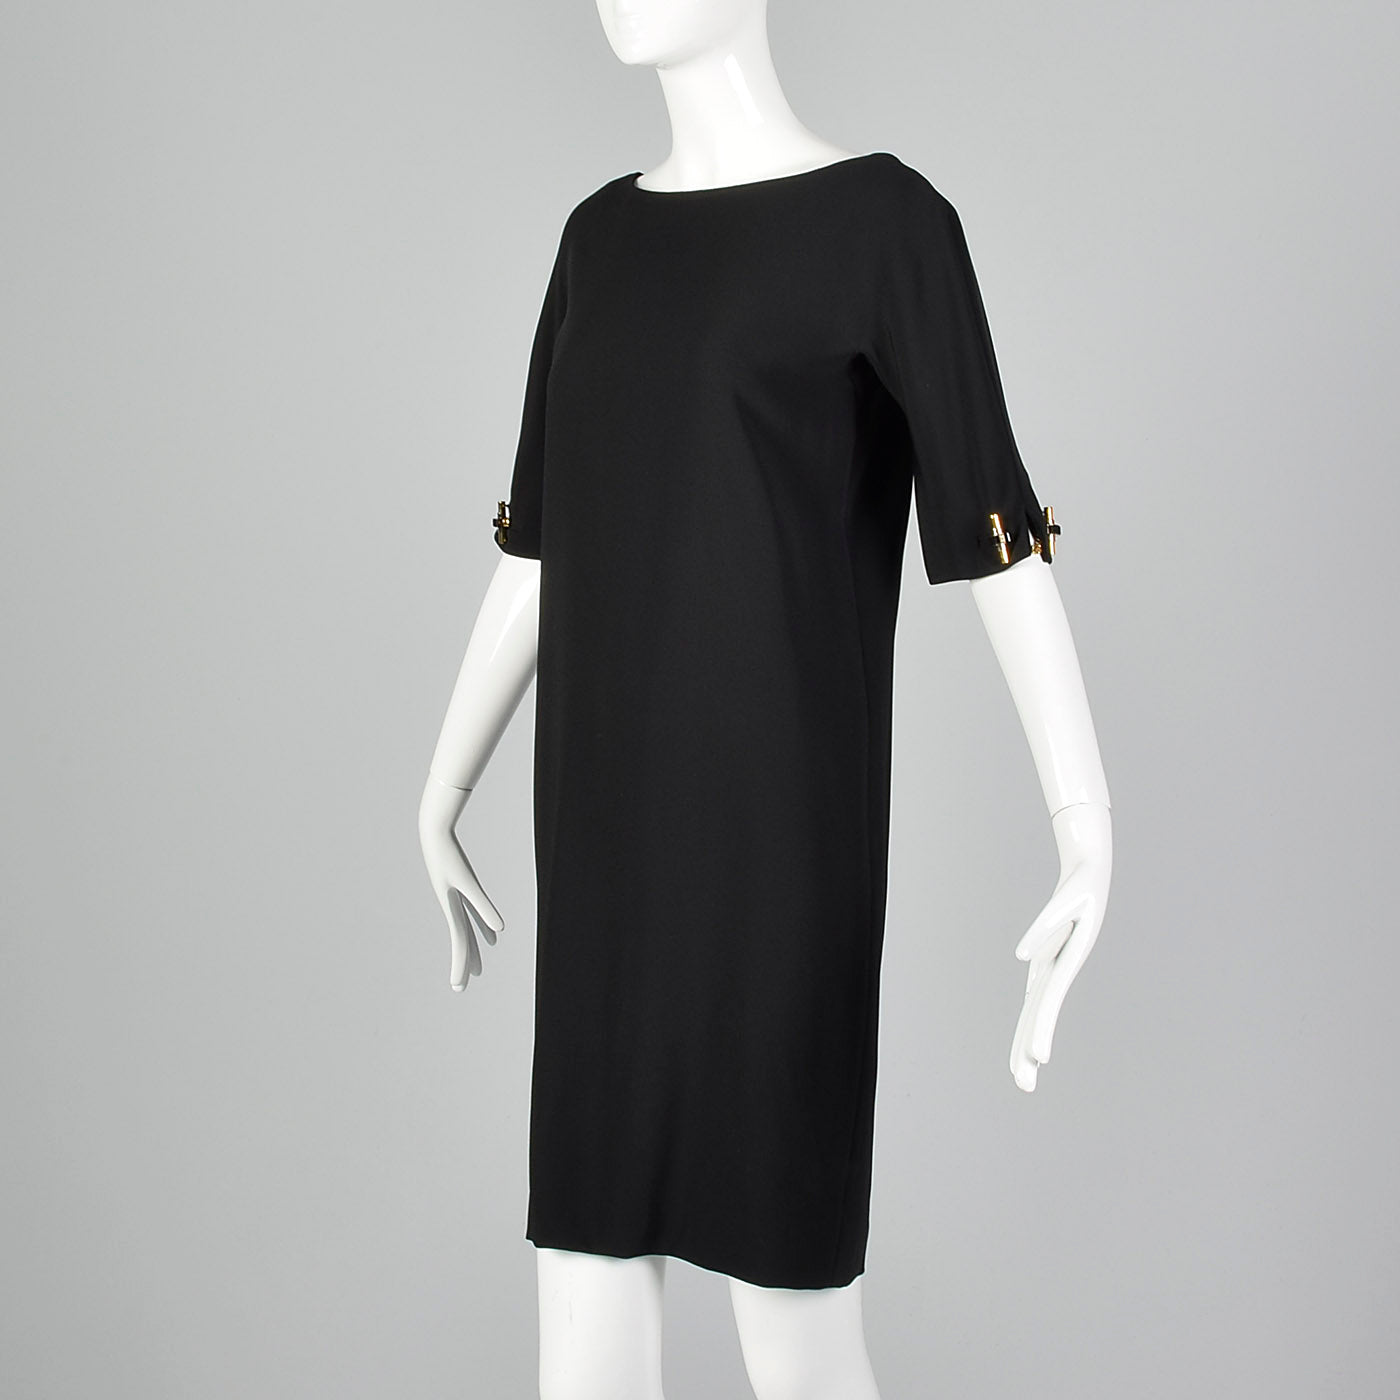 1990s Tom Ford for Gucci Black Shift Dress with Link Buttons